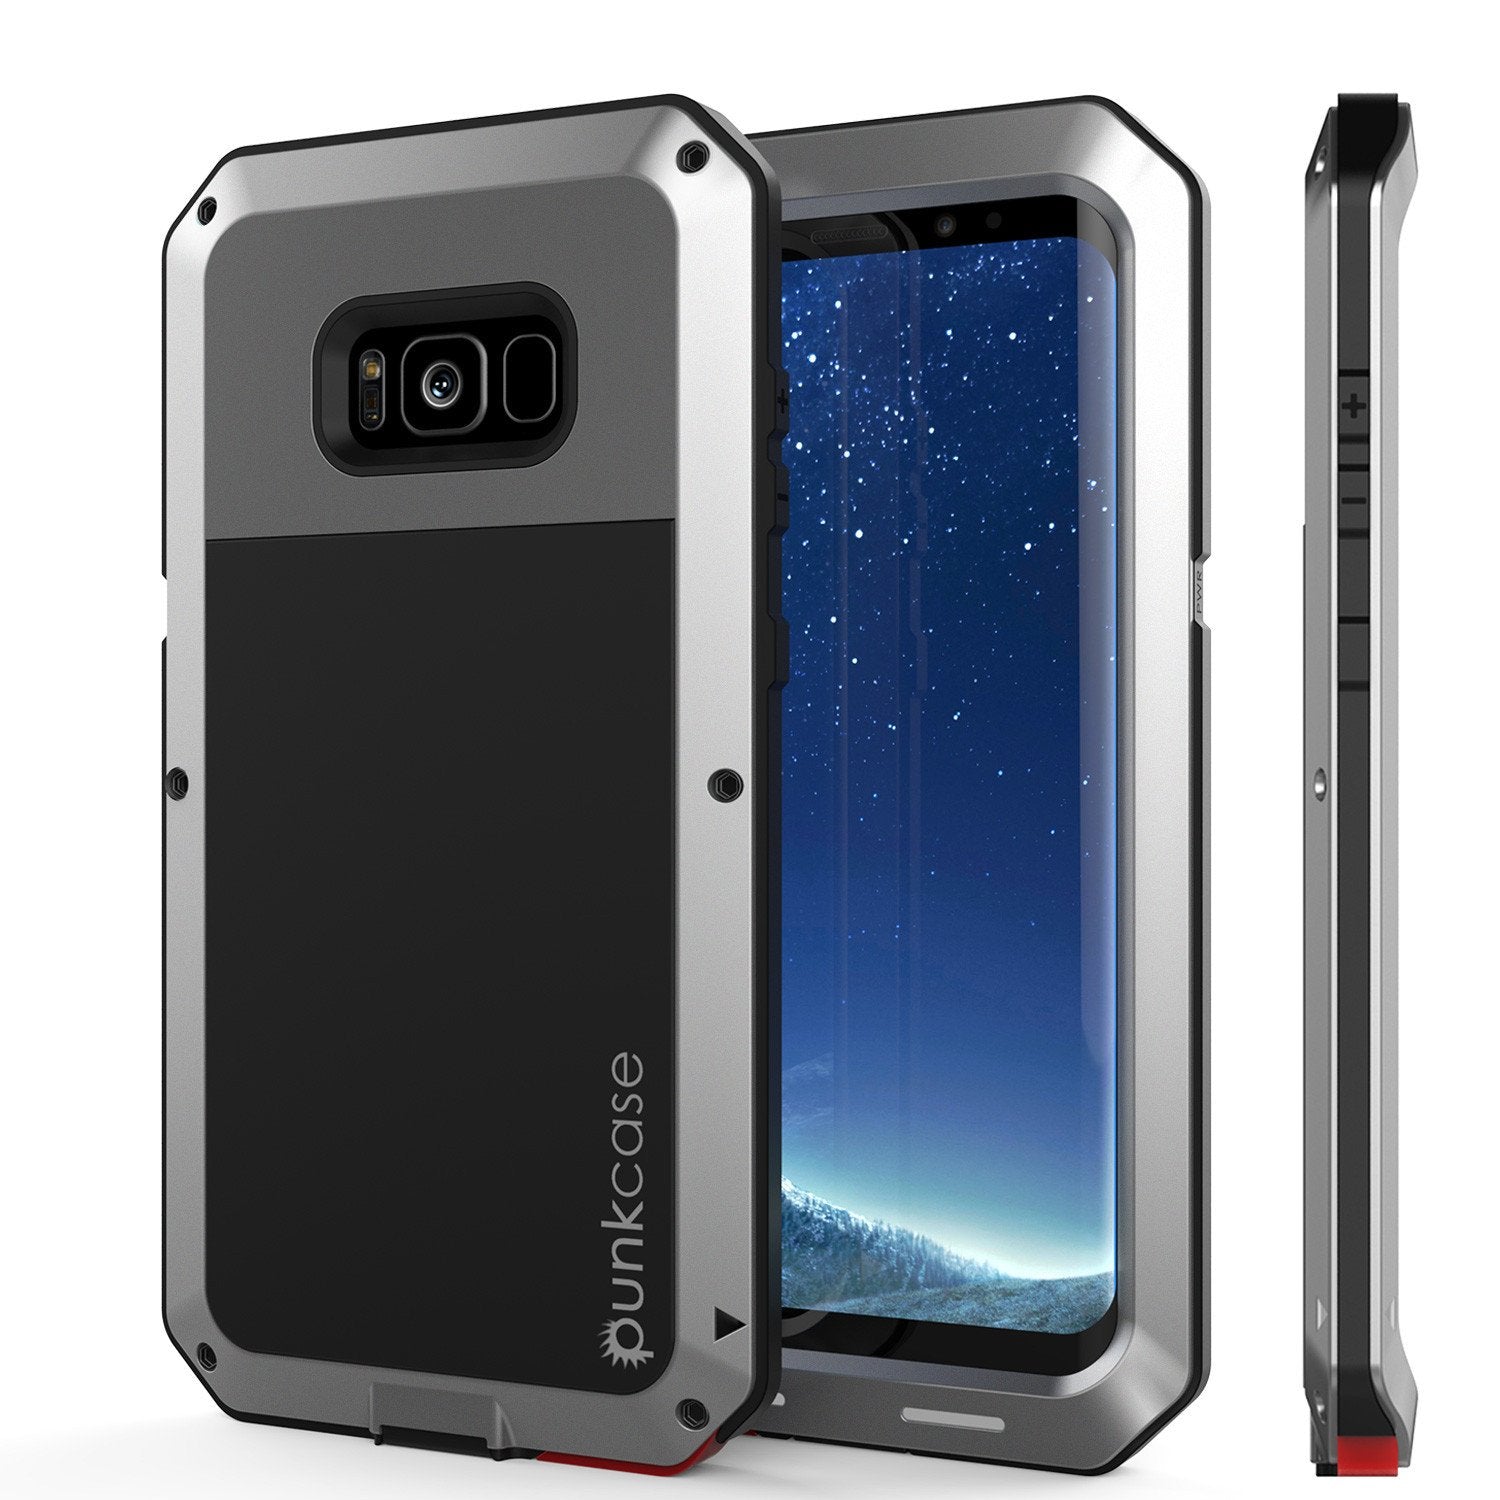 Galaxy S8 Metal Case, Heavy Duty Military Grade Rugged Cover [SILVER]